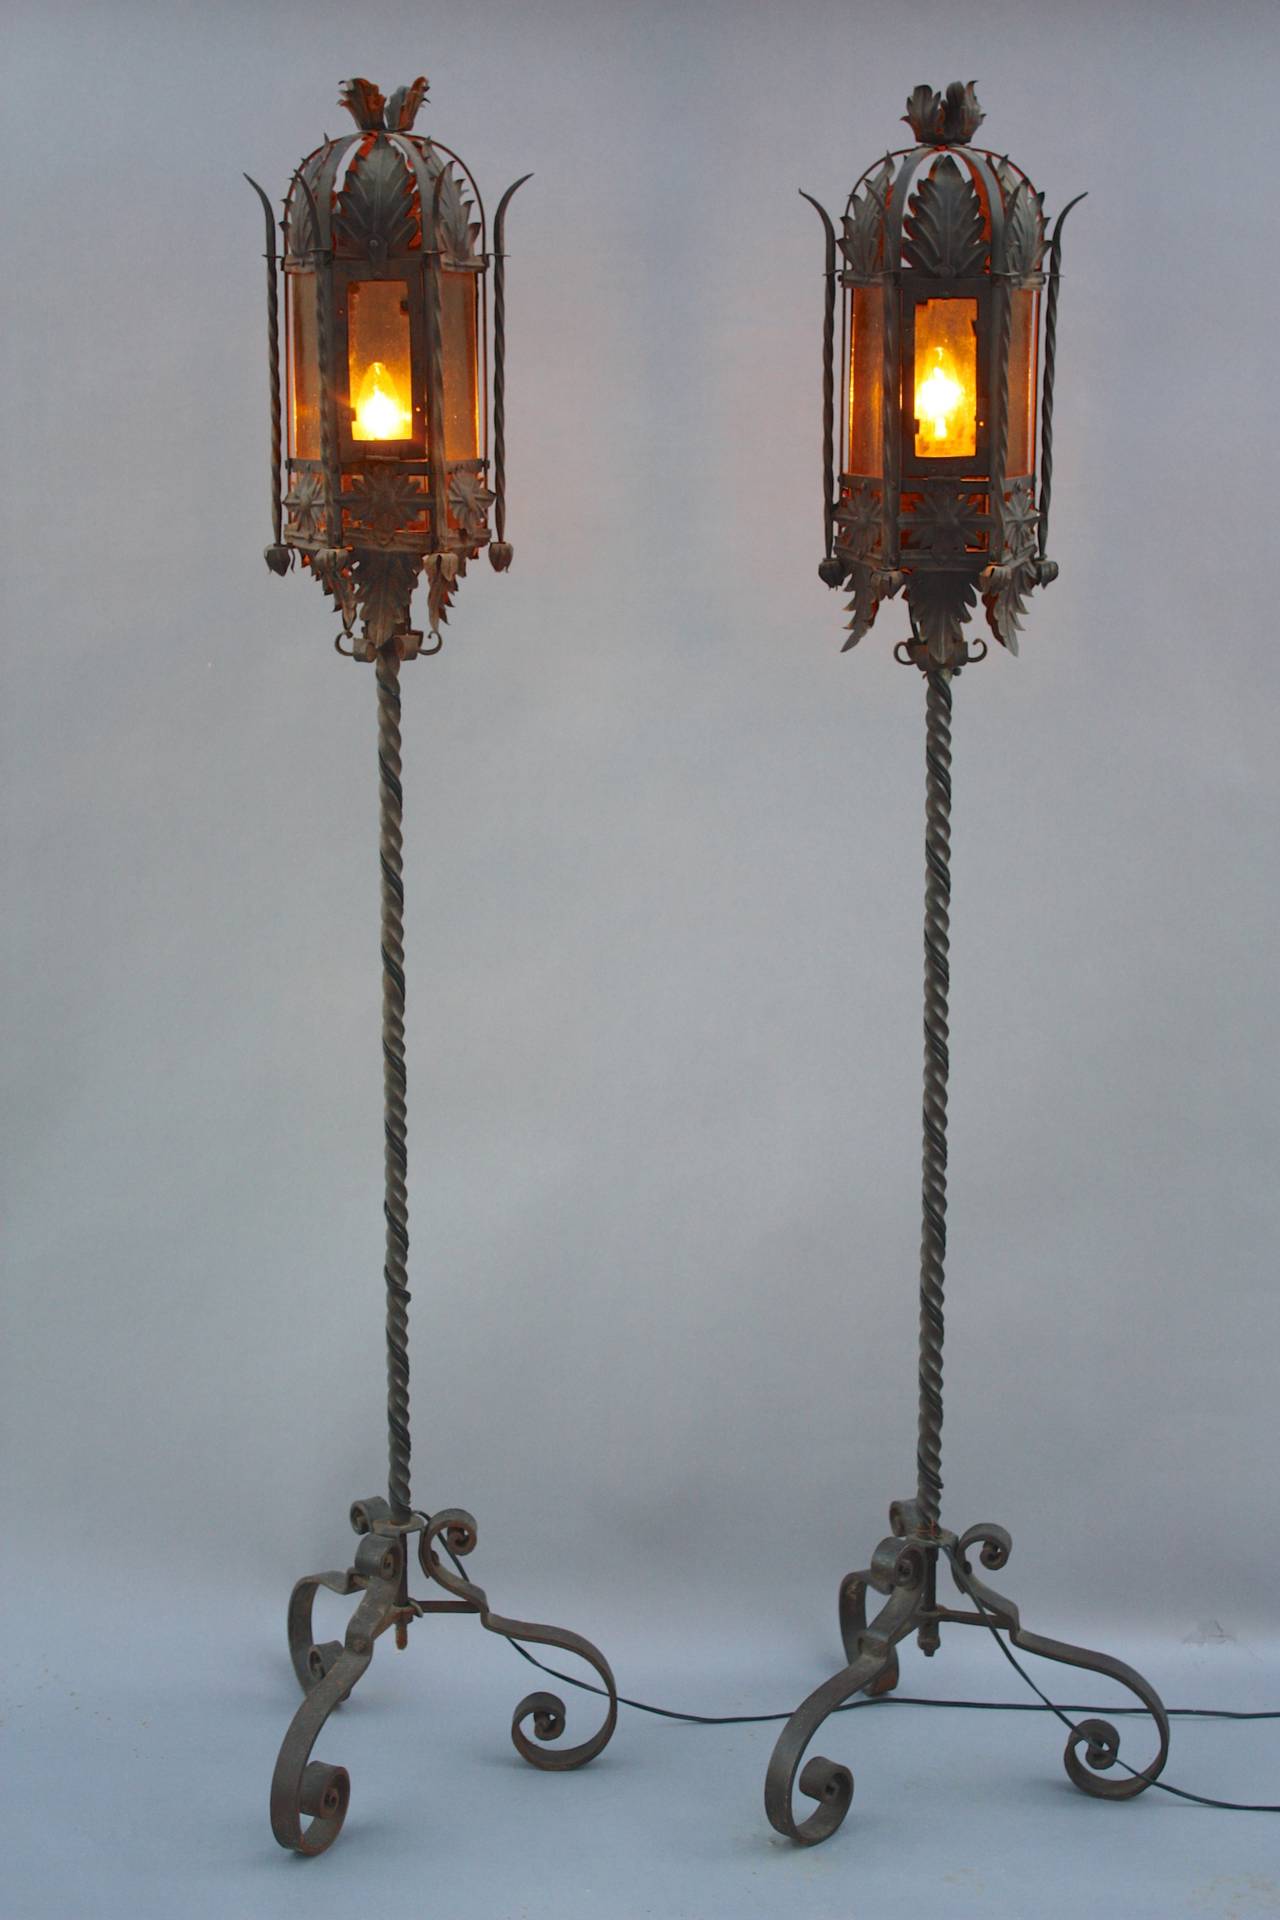 Torchieres with wrought iron base and original glass, circa 1920s. Each measures 66.5